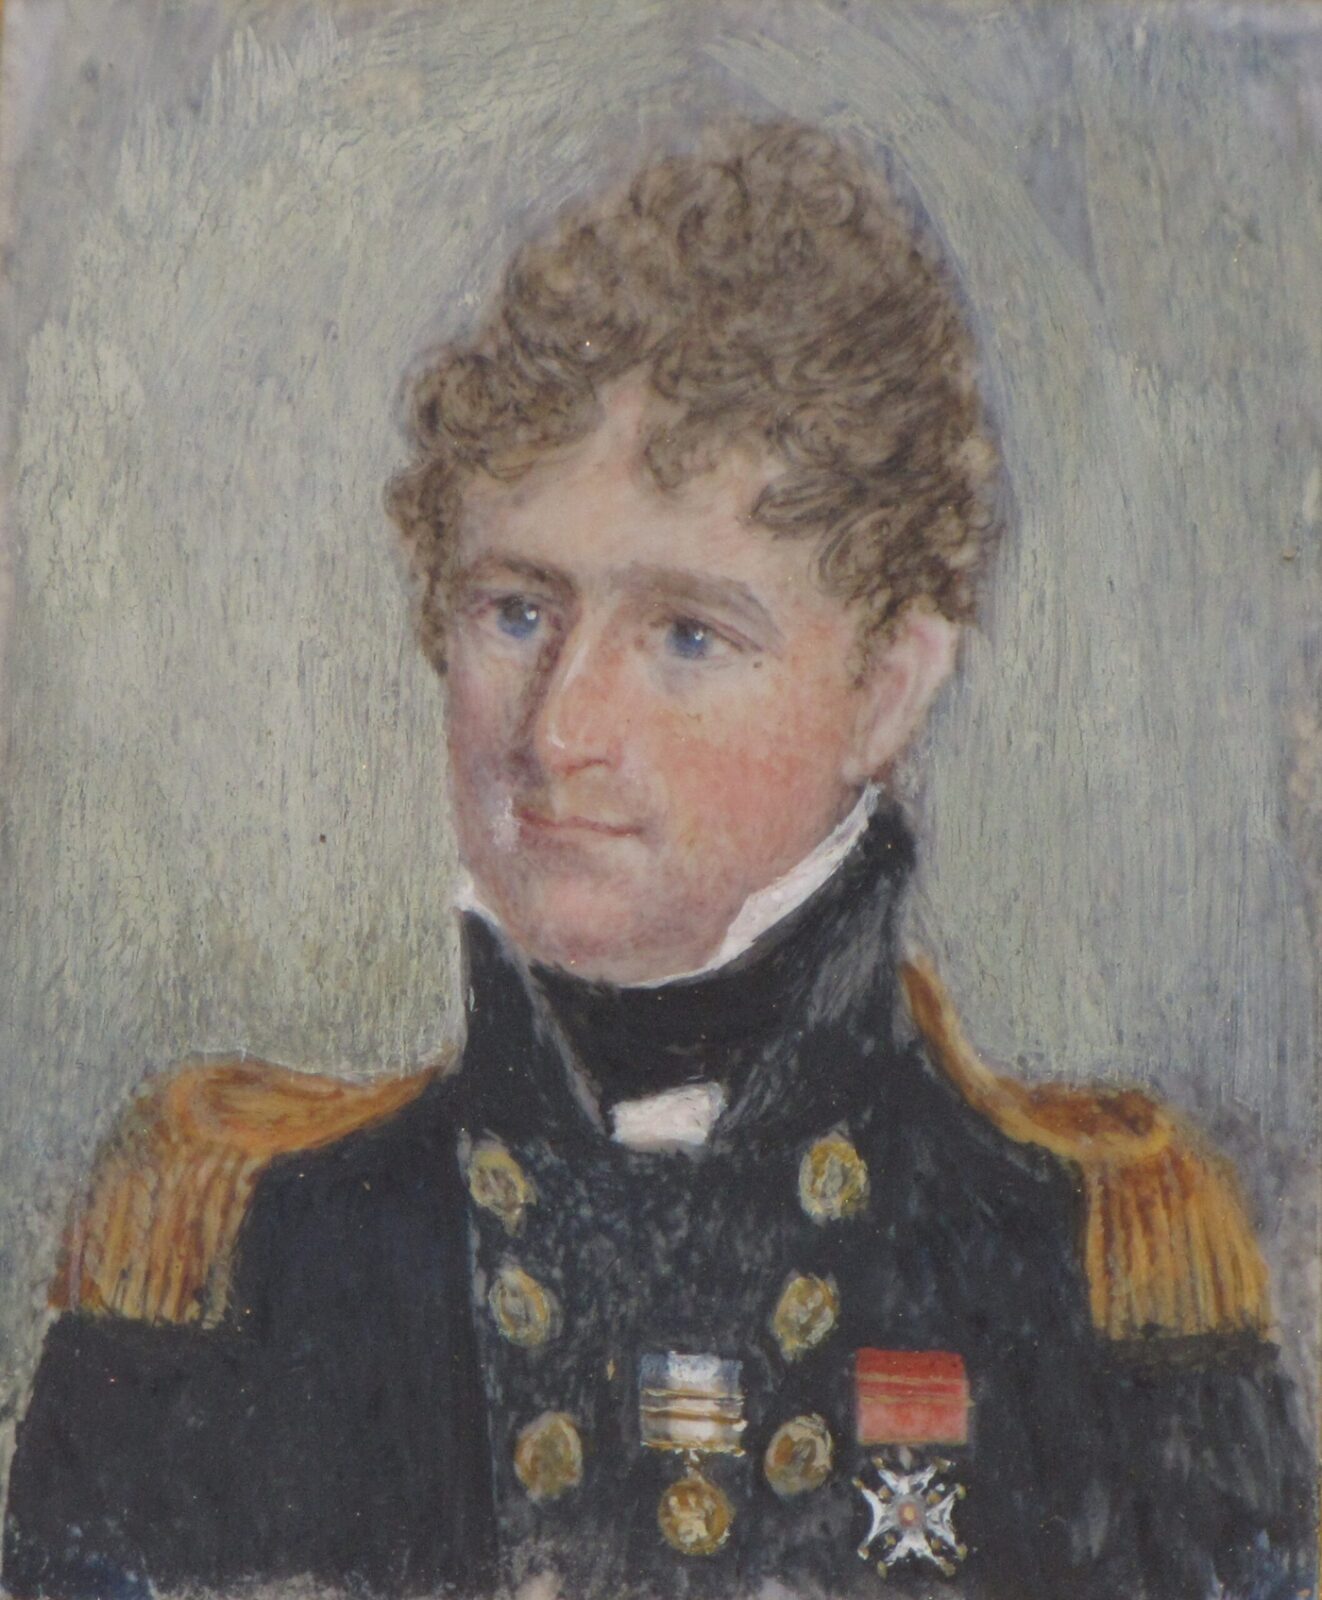 Miniature of Jane's fifth brother Francis Austen (1774-1865) in uniform as Captain of HMS Canopus.